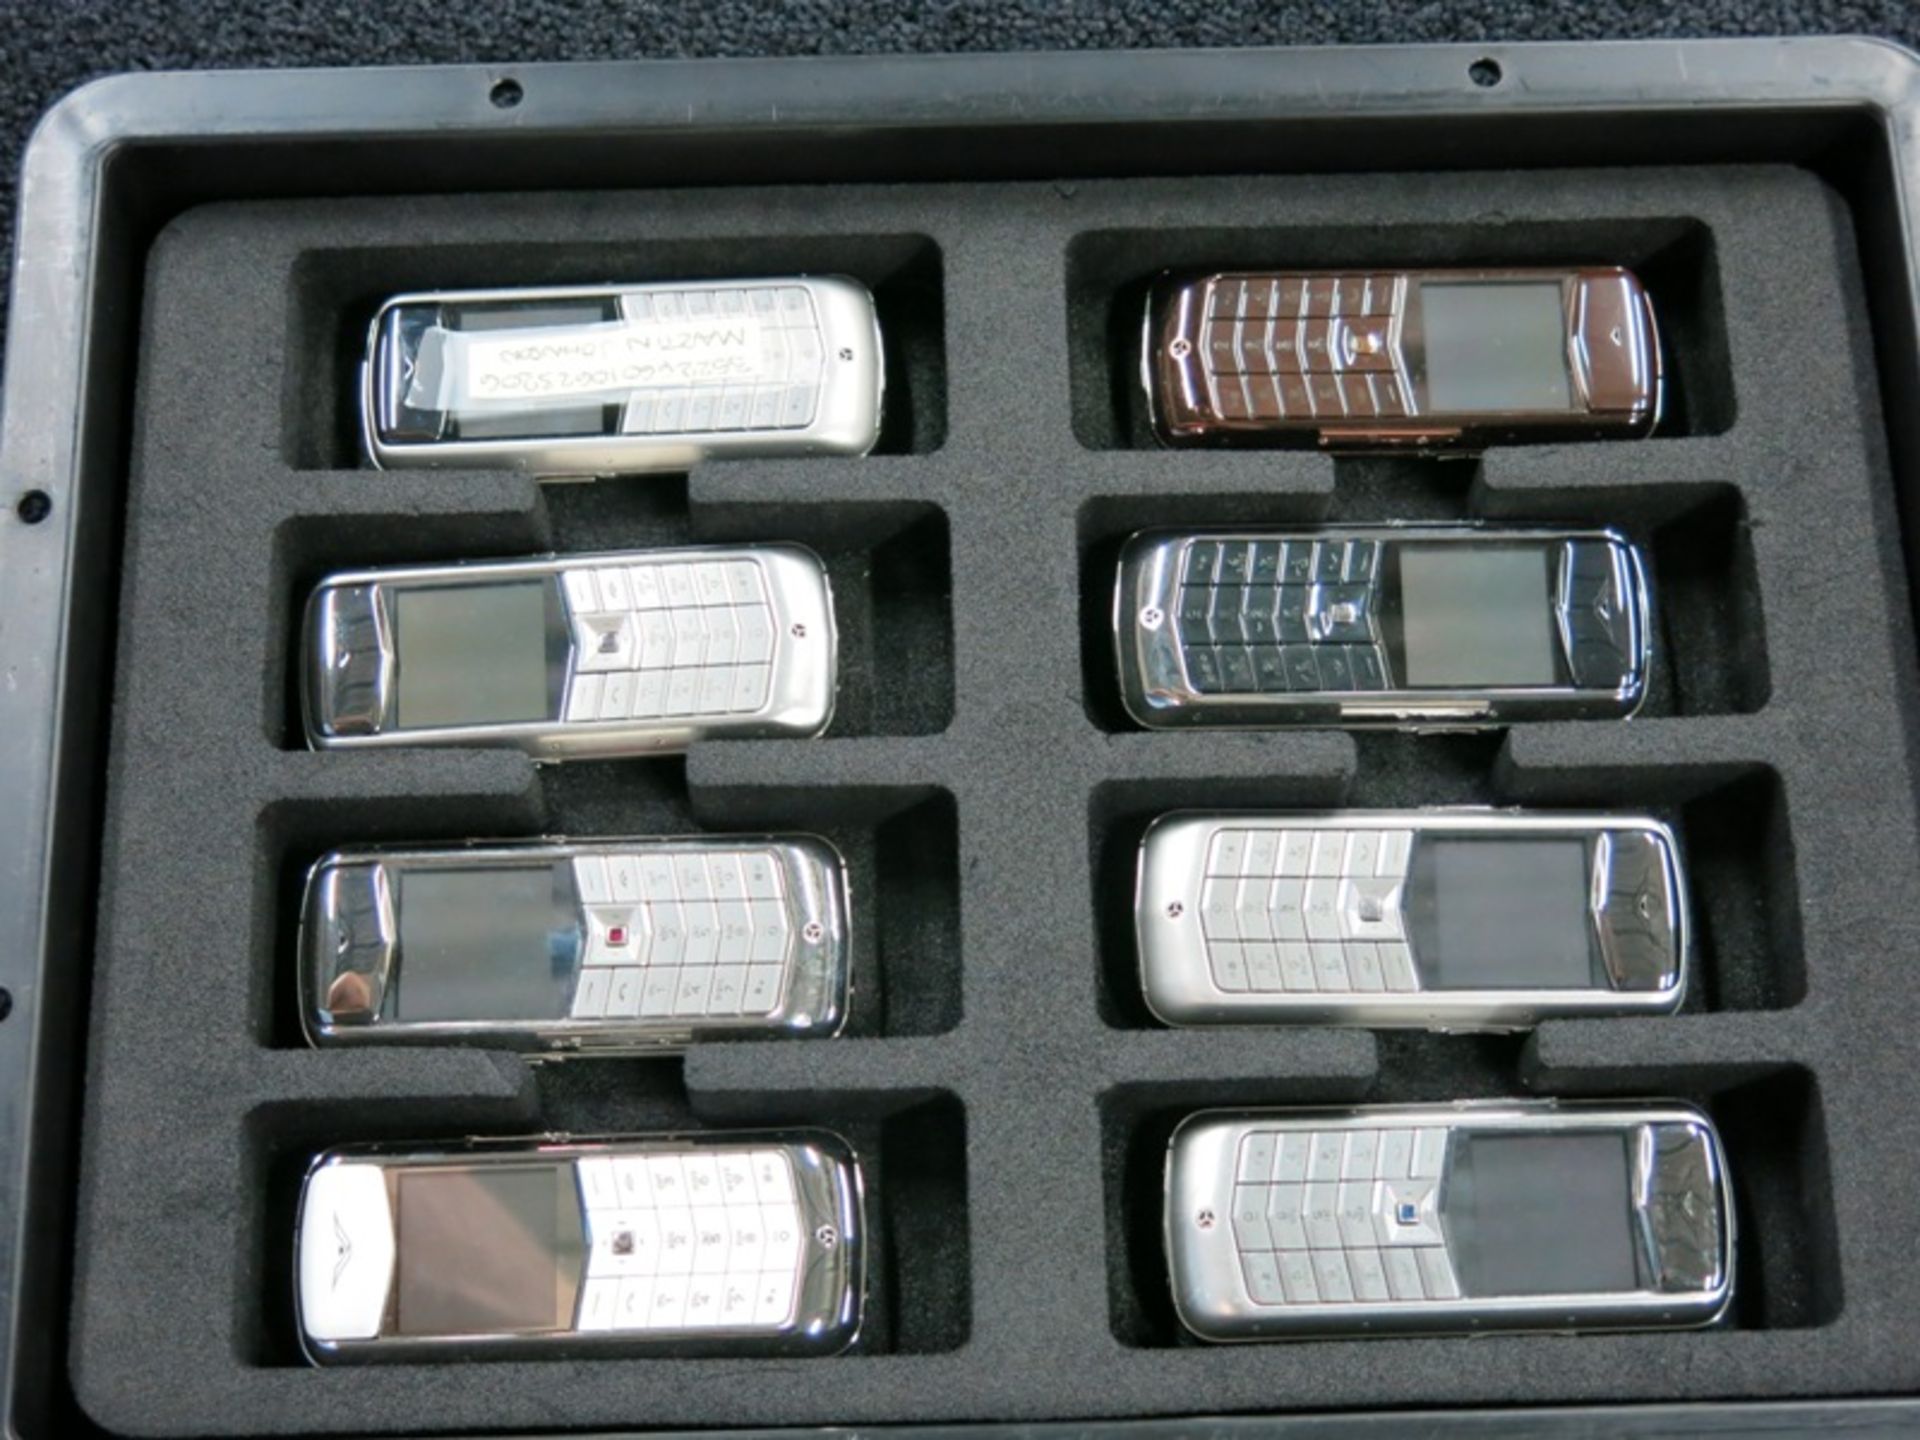 Archive Collection of 49 Vertu Constellation Classic Phones - Image 4 of 5